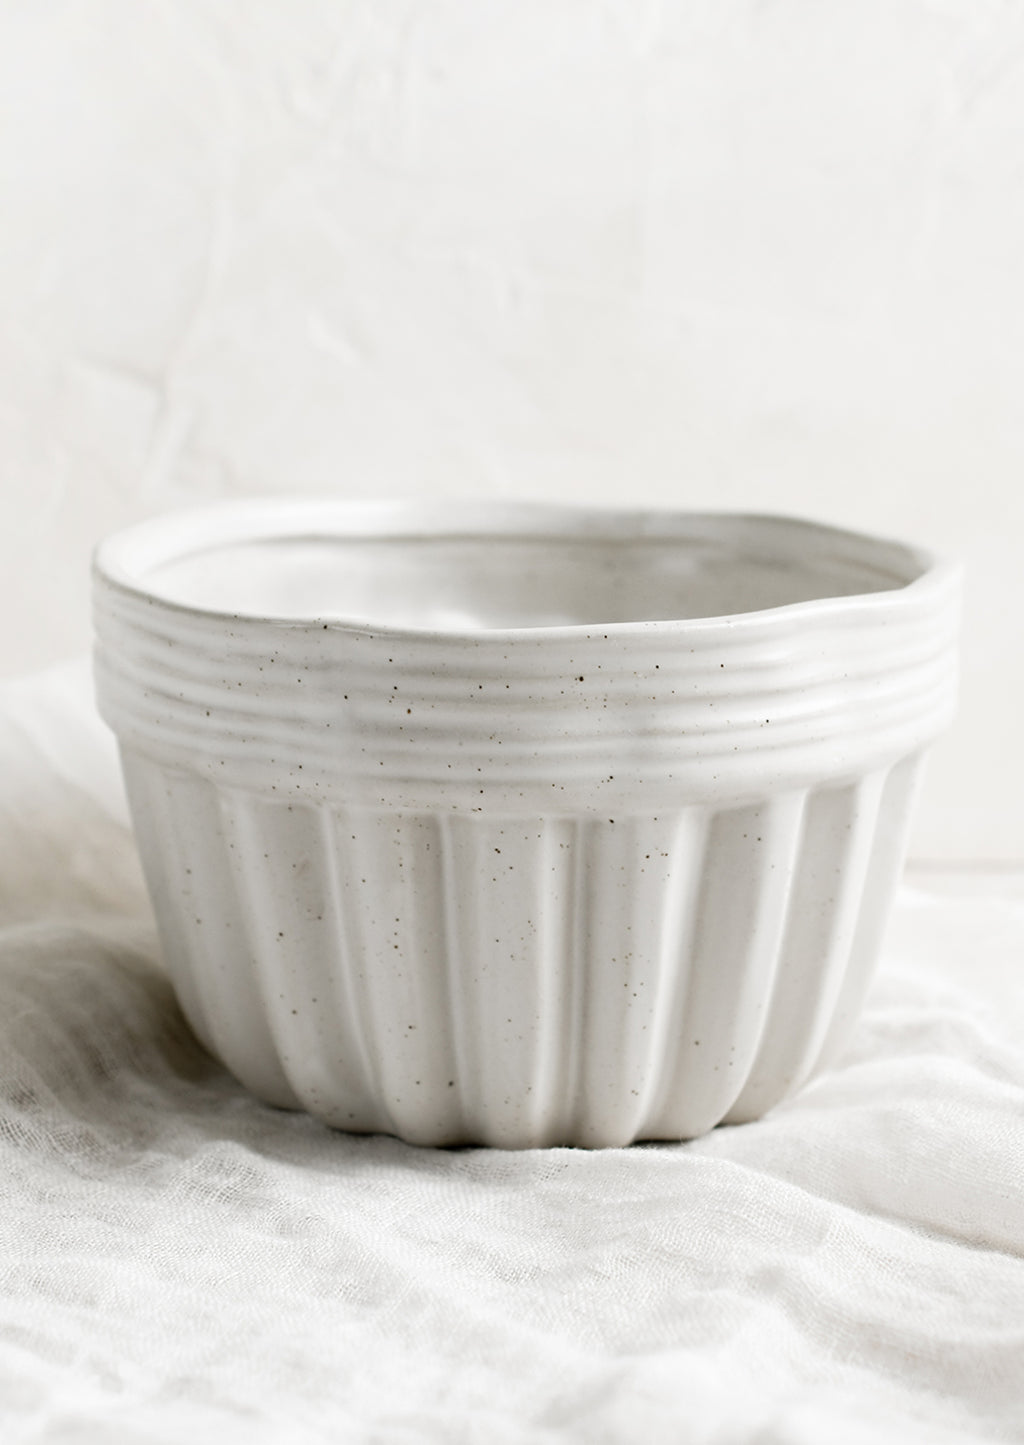 Round: A round ceramic bowl in the shape of a disposable produce basket.